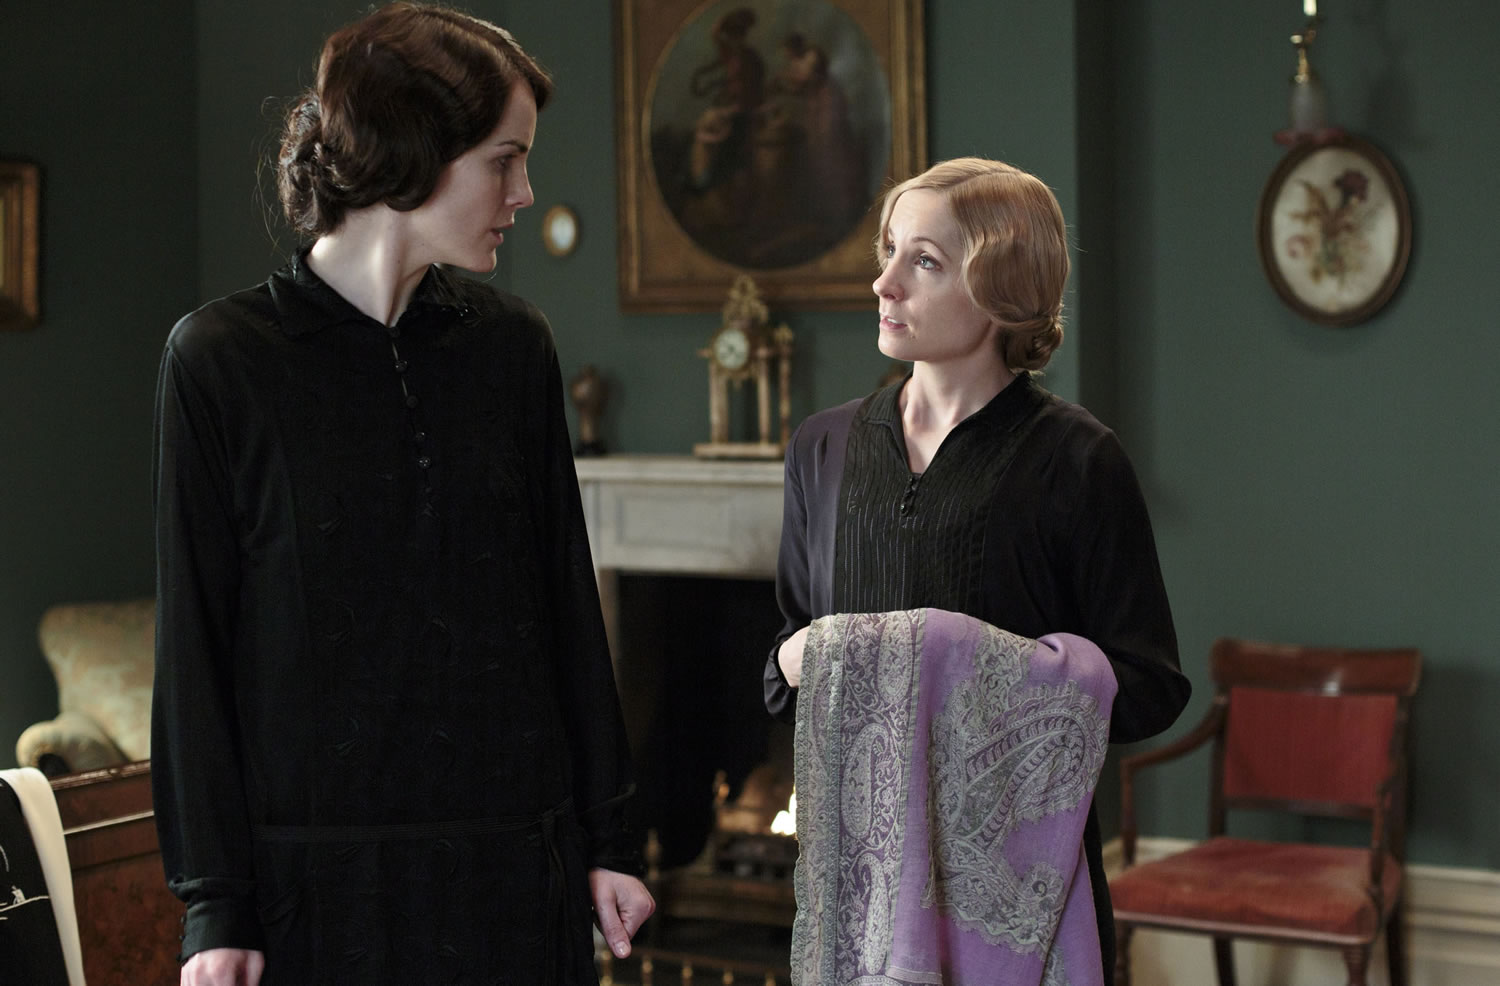 Michelle Dockery as Lady Mary, left, and Joanne Froggatt as Anna Bates, in a scene from season four of the Masterpiece TV series, &quot;Downton Abbey.&quot; (Nick Briggs/PBS/Masterpiece)